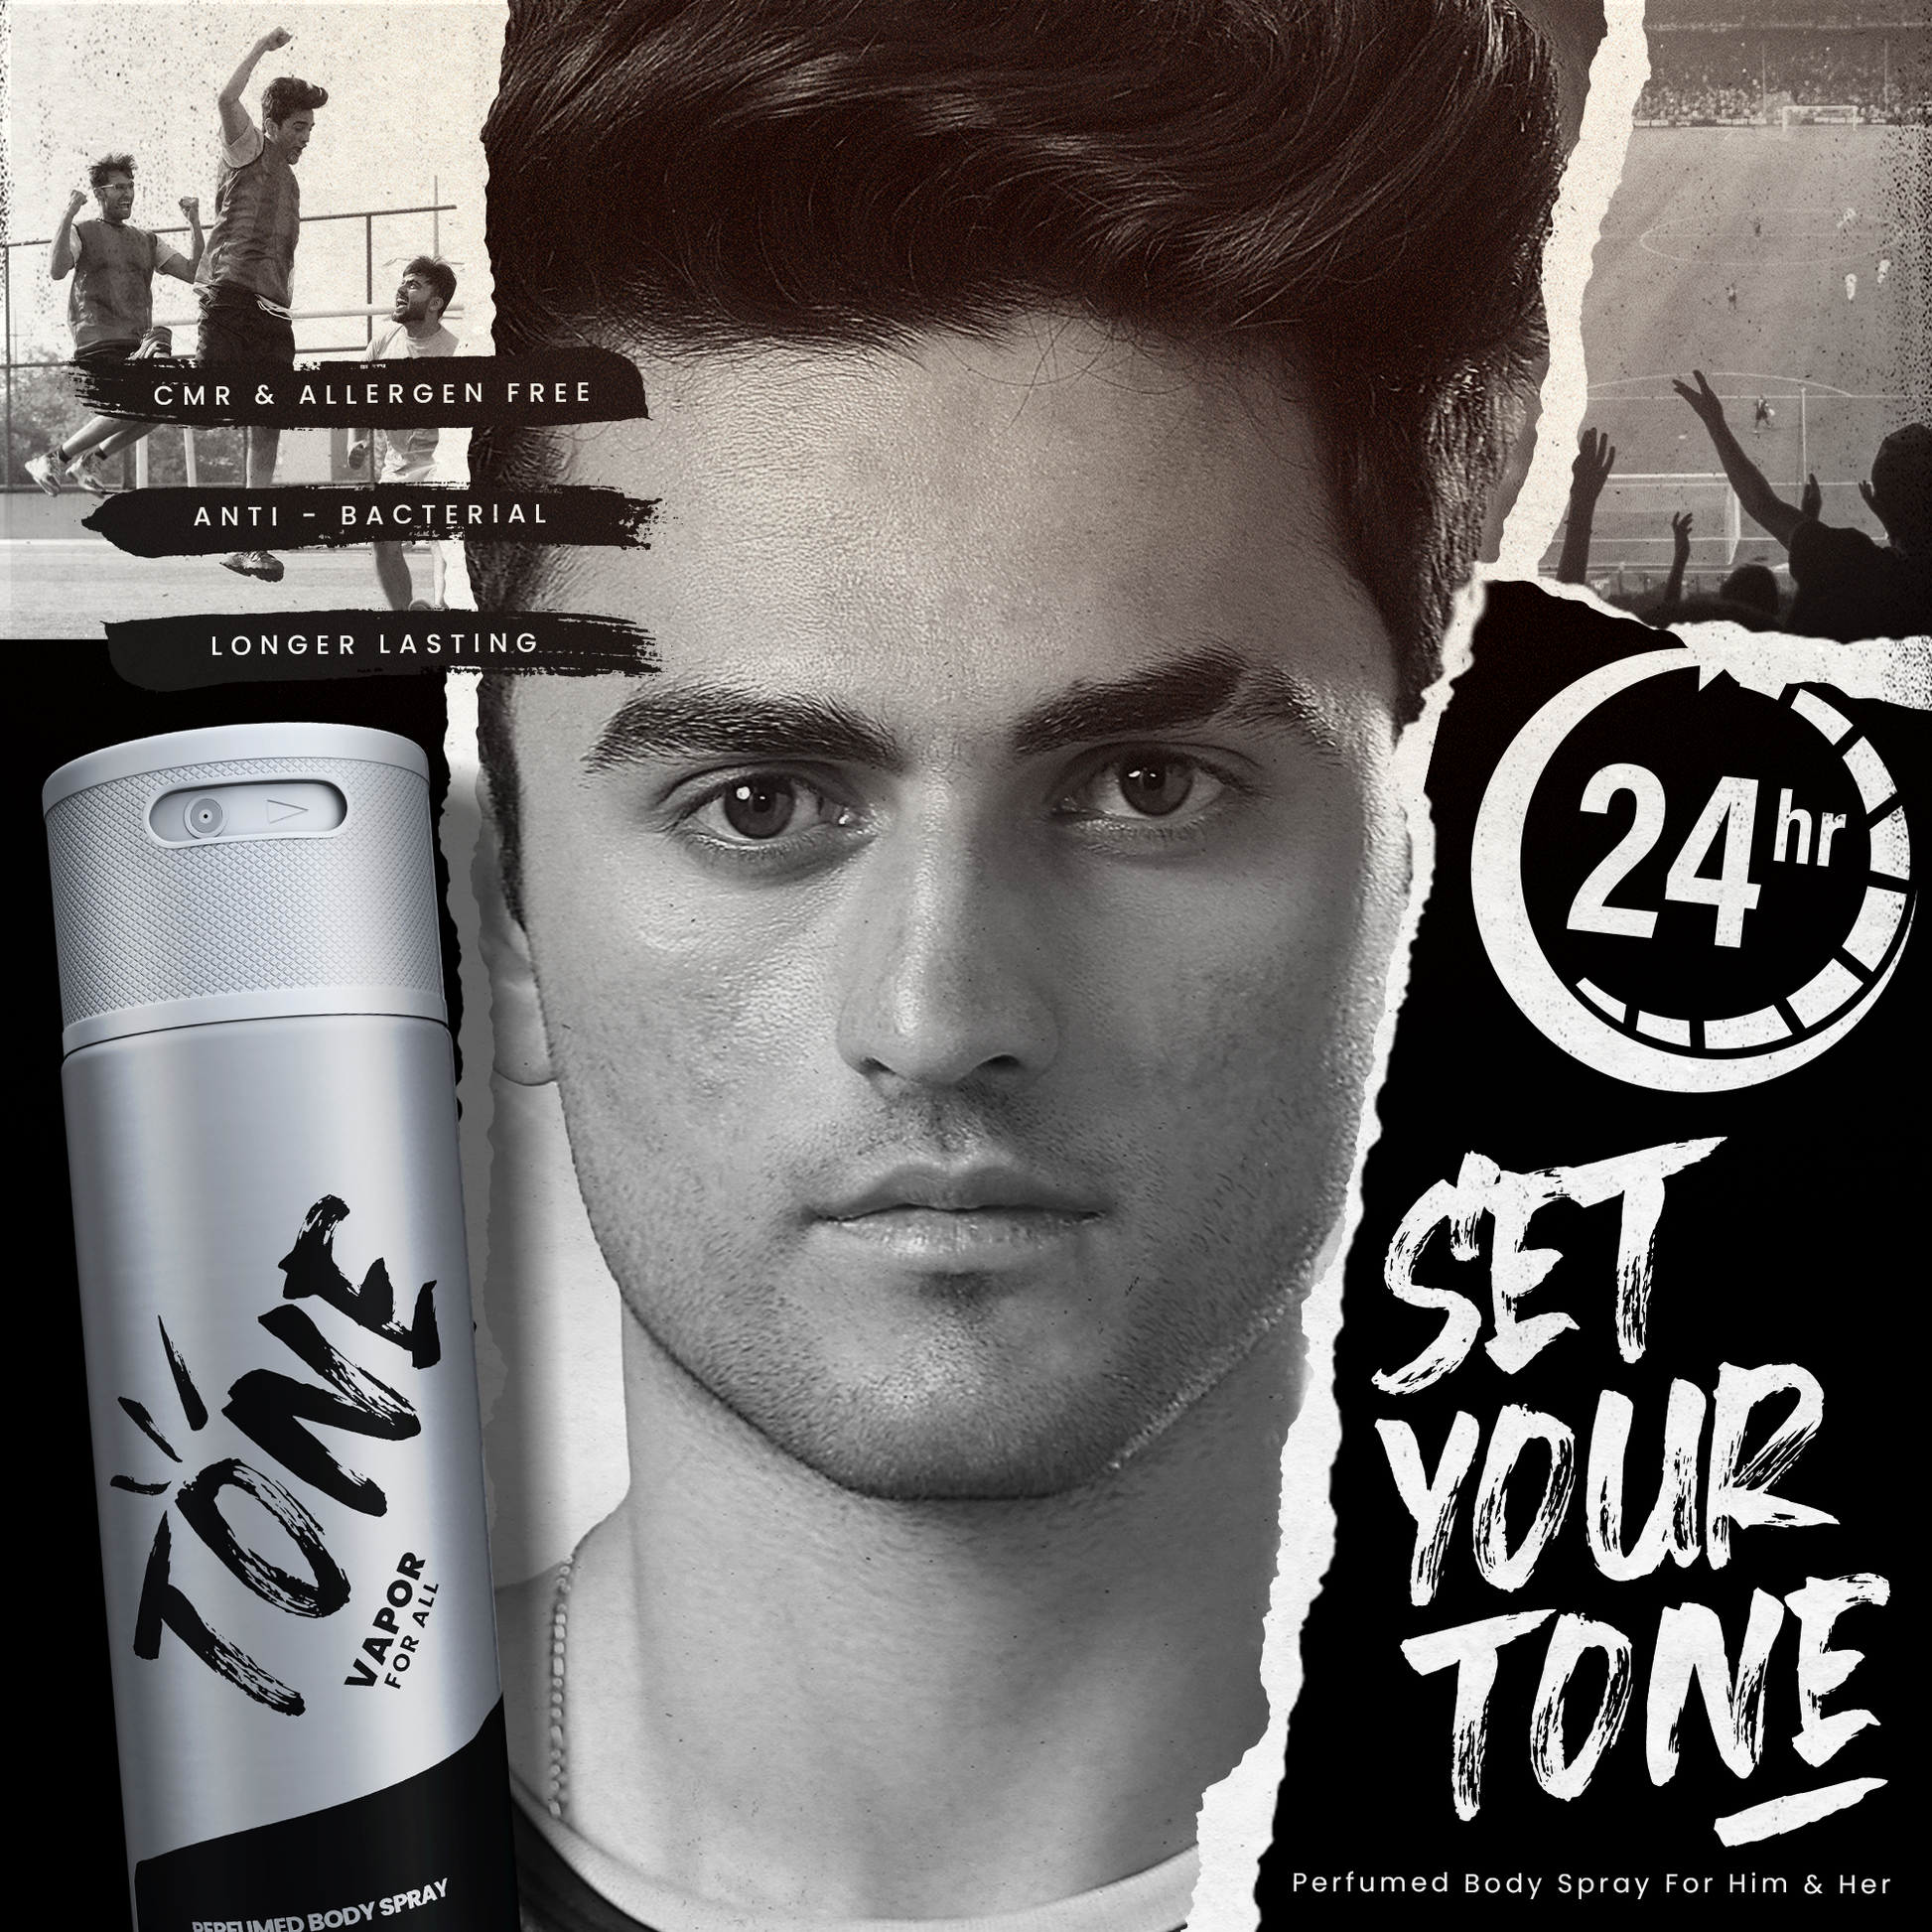 Tone Vapor For All - Bold and warm fragrance for everyone